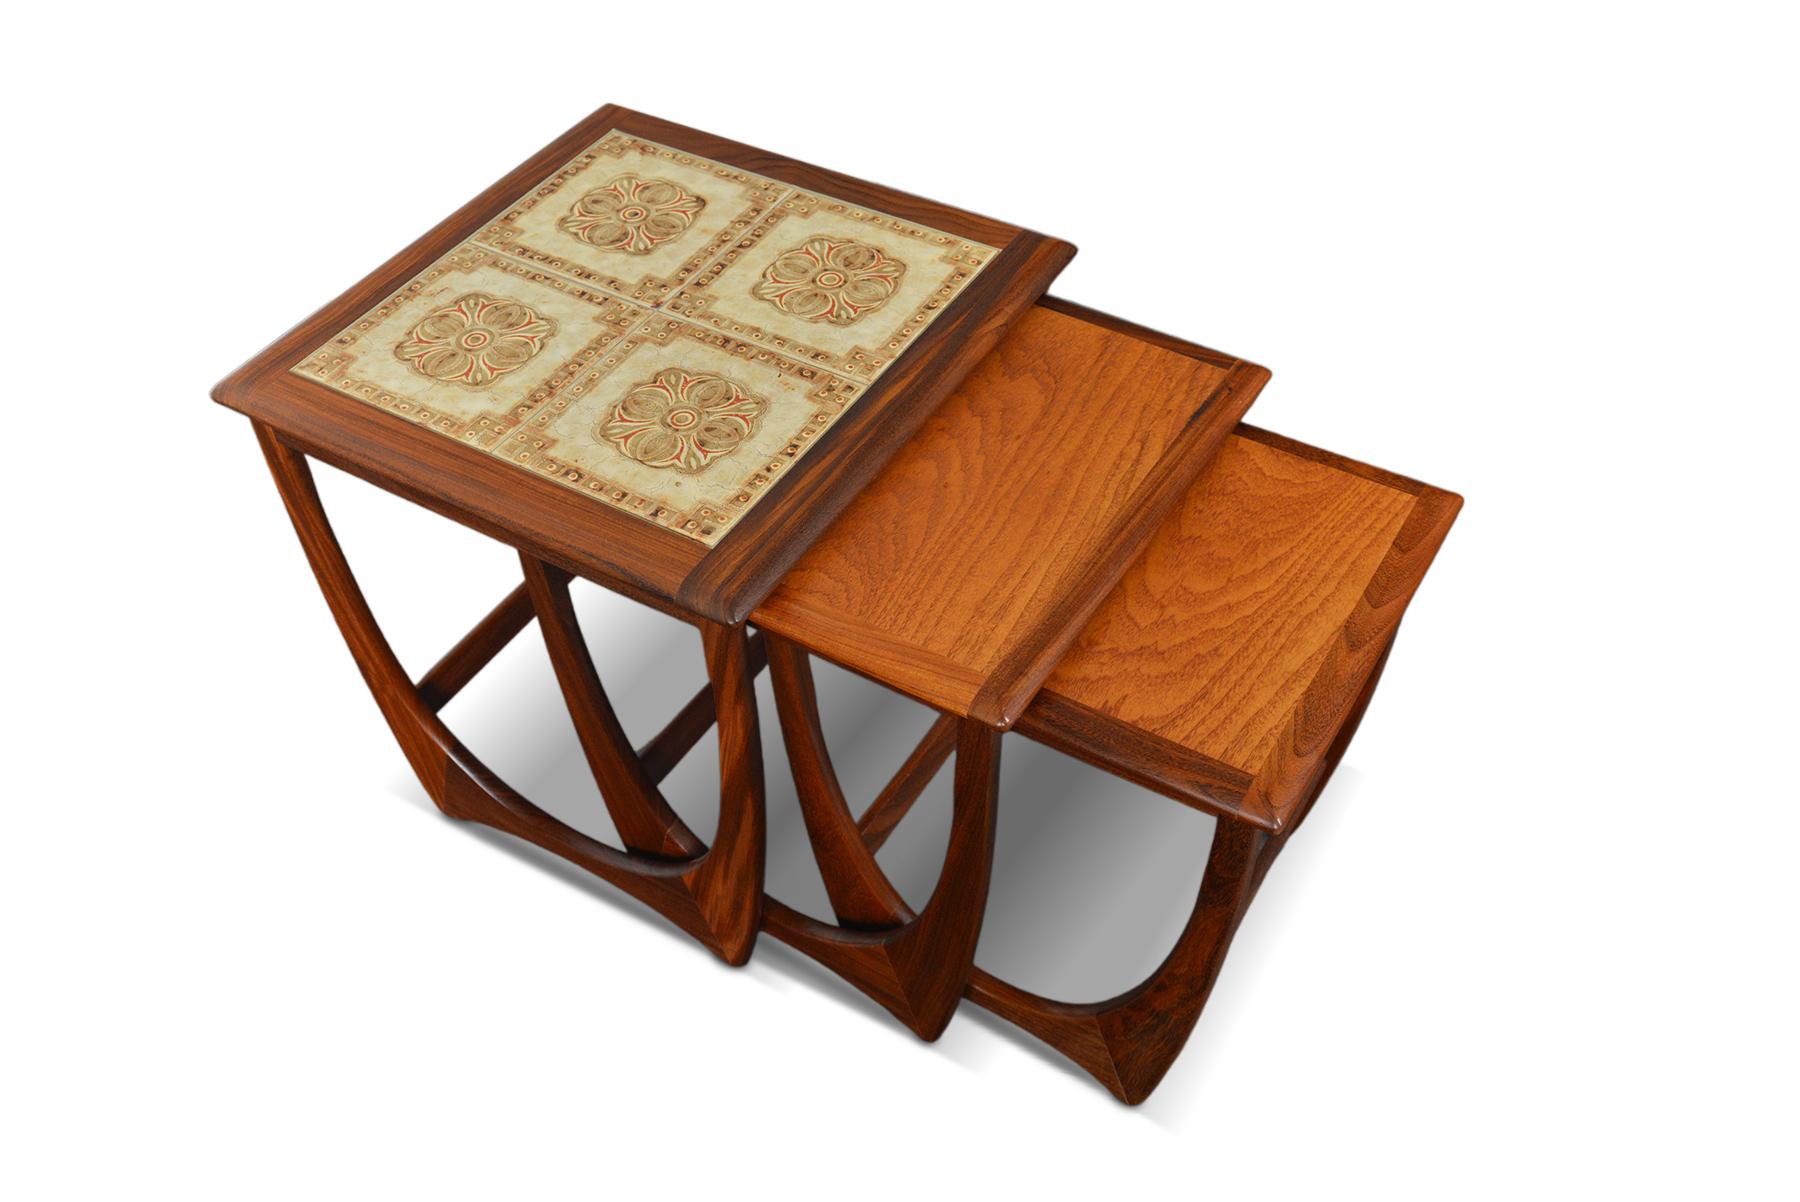 English G Plan Astro Nesting Tables With Tile Top #1 For Sale